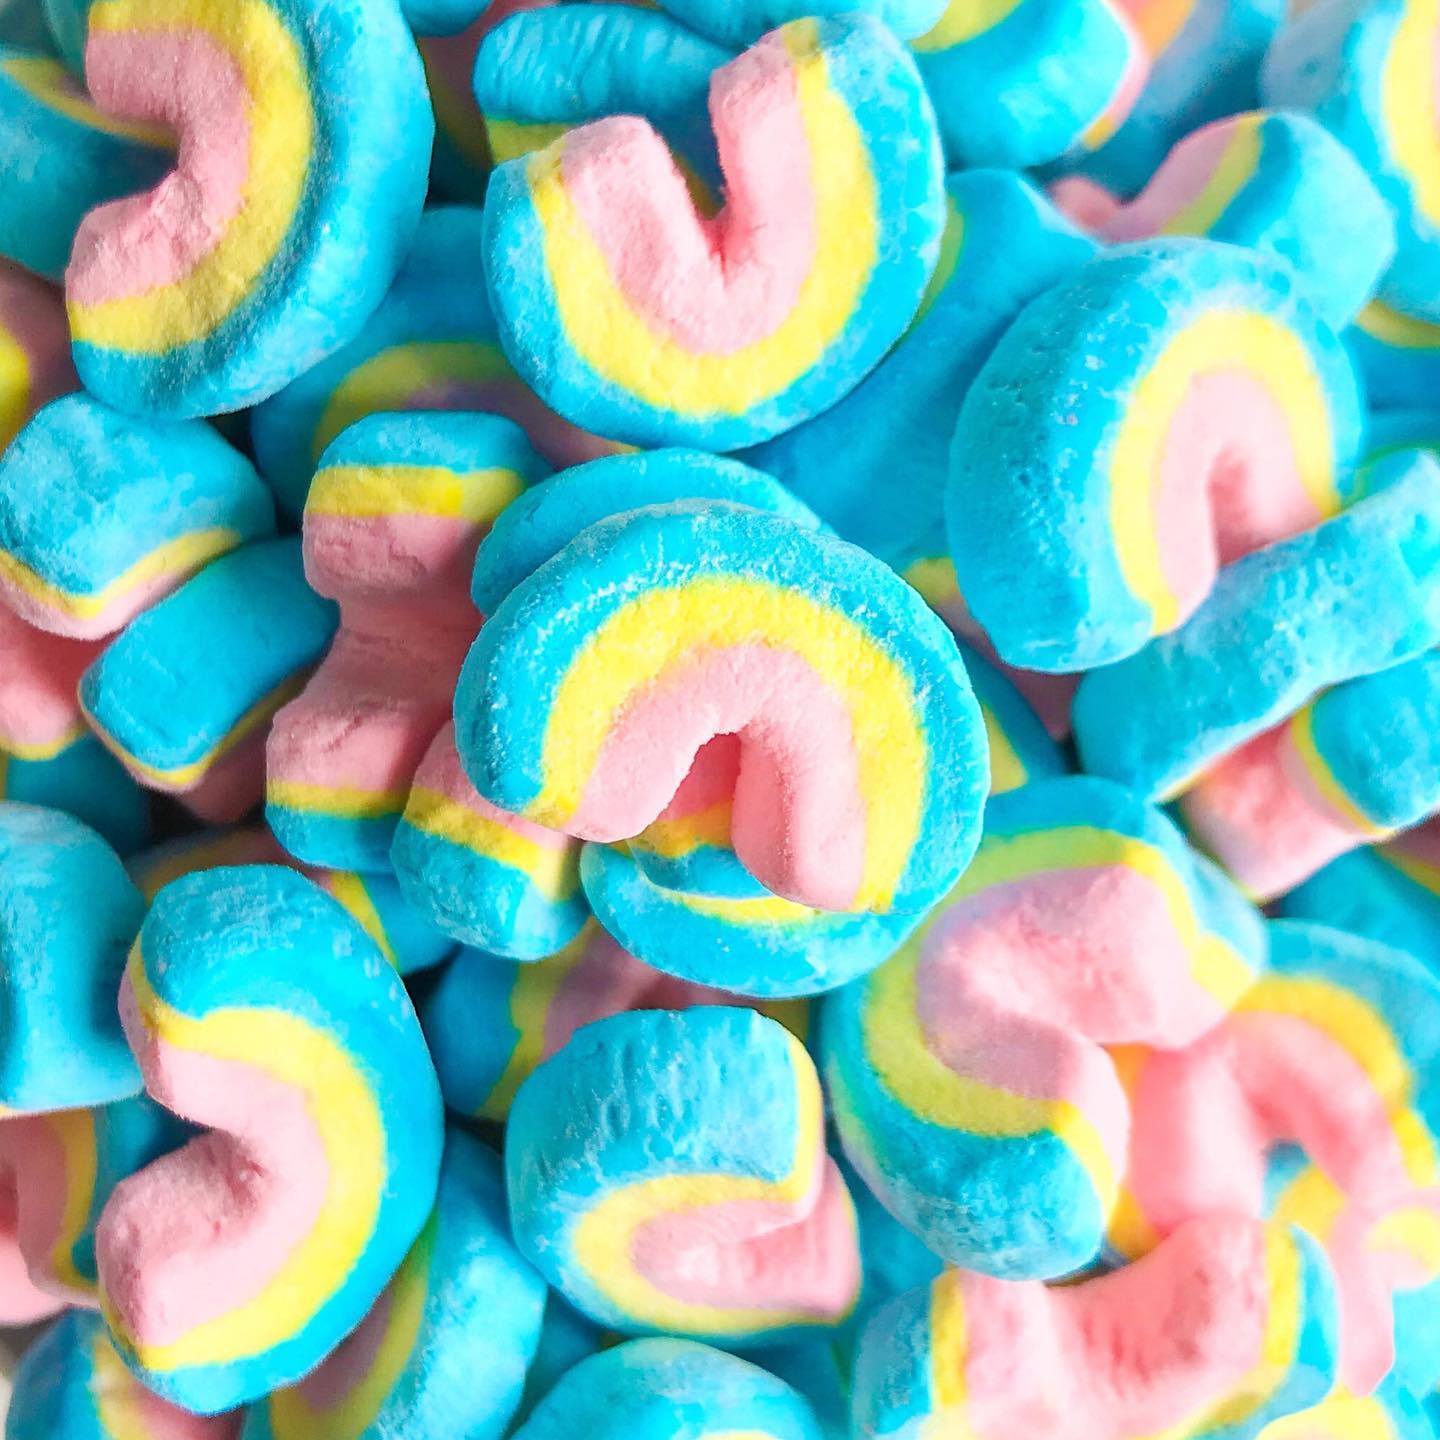 A close up of blue and pink marshmallows - Marshmallows